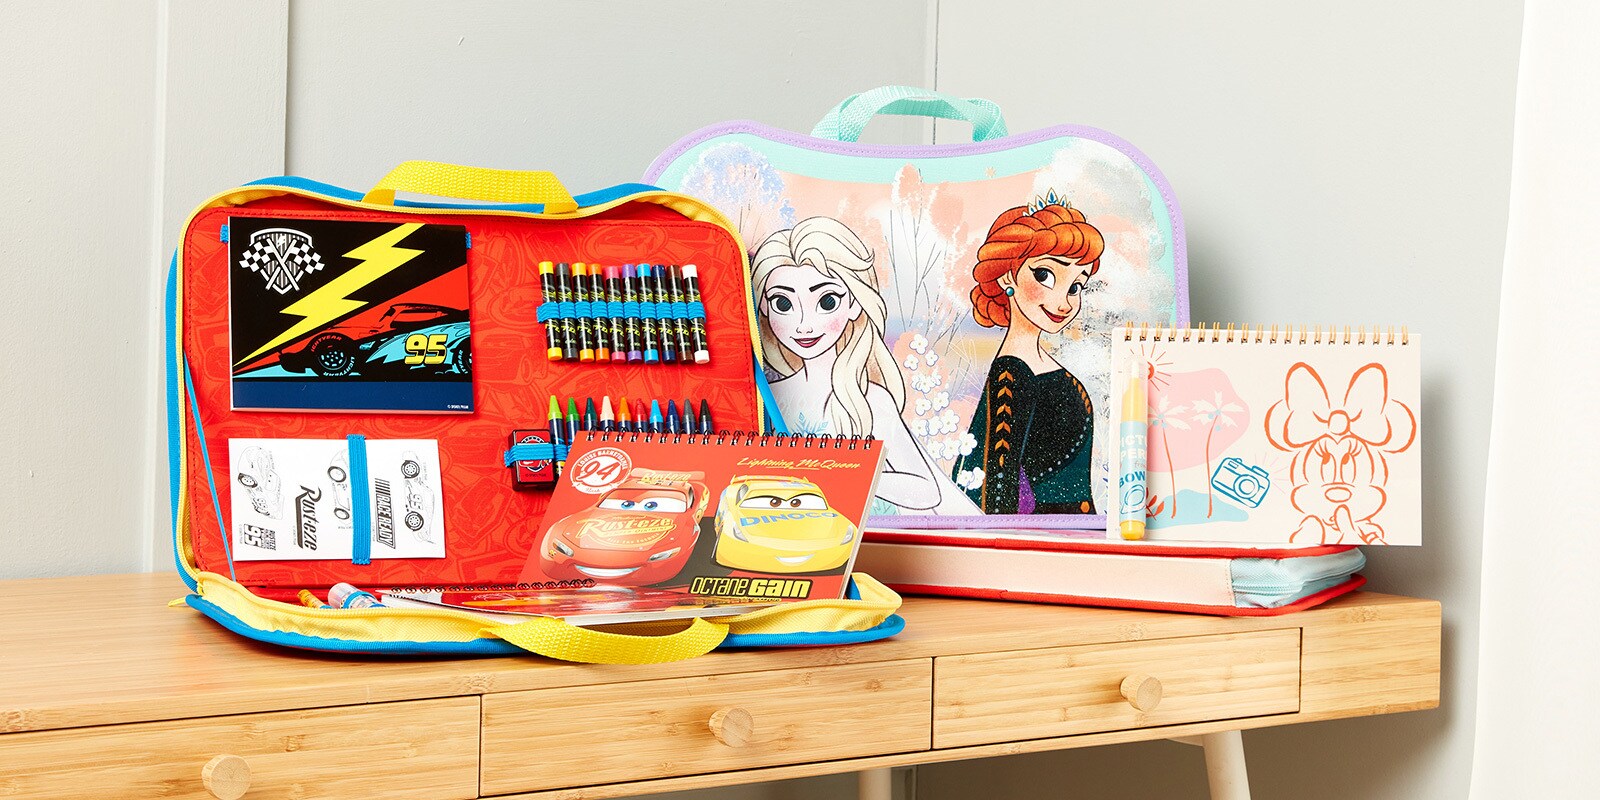 A selection of stationery inspired by Cars, Frozen and Minnie Mouse, available at shopDisney